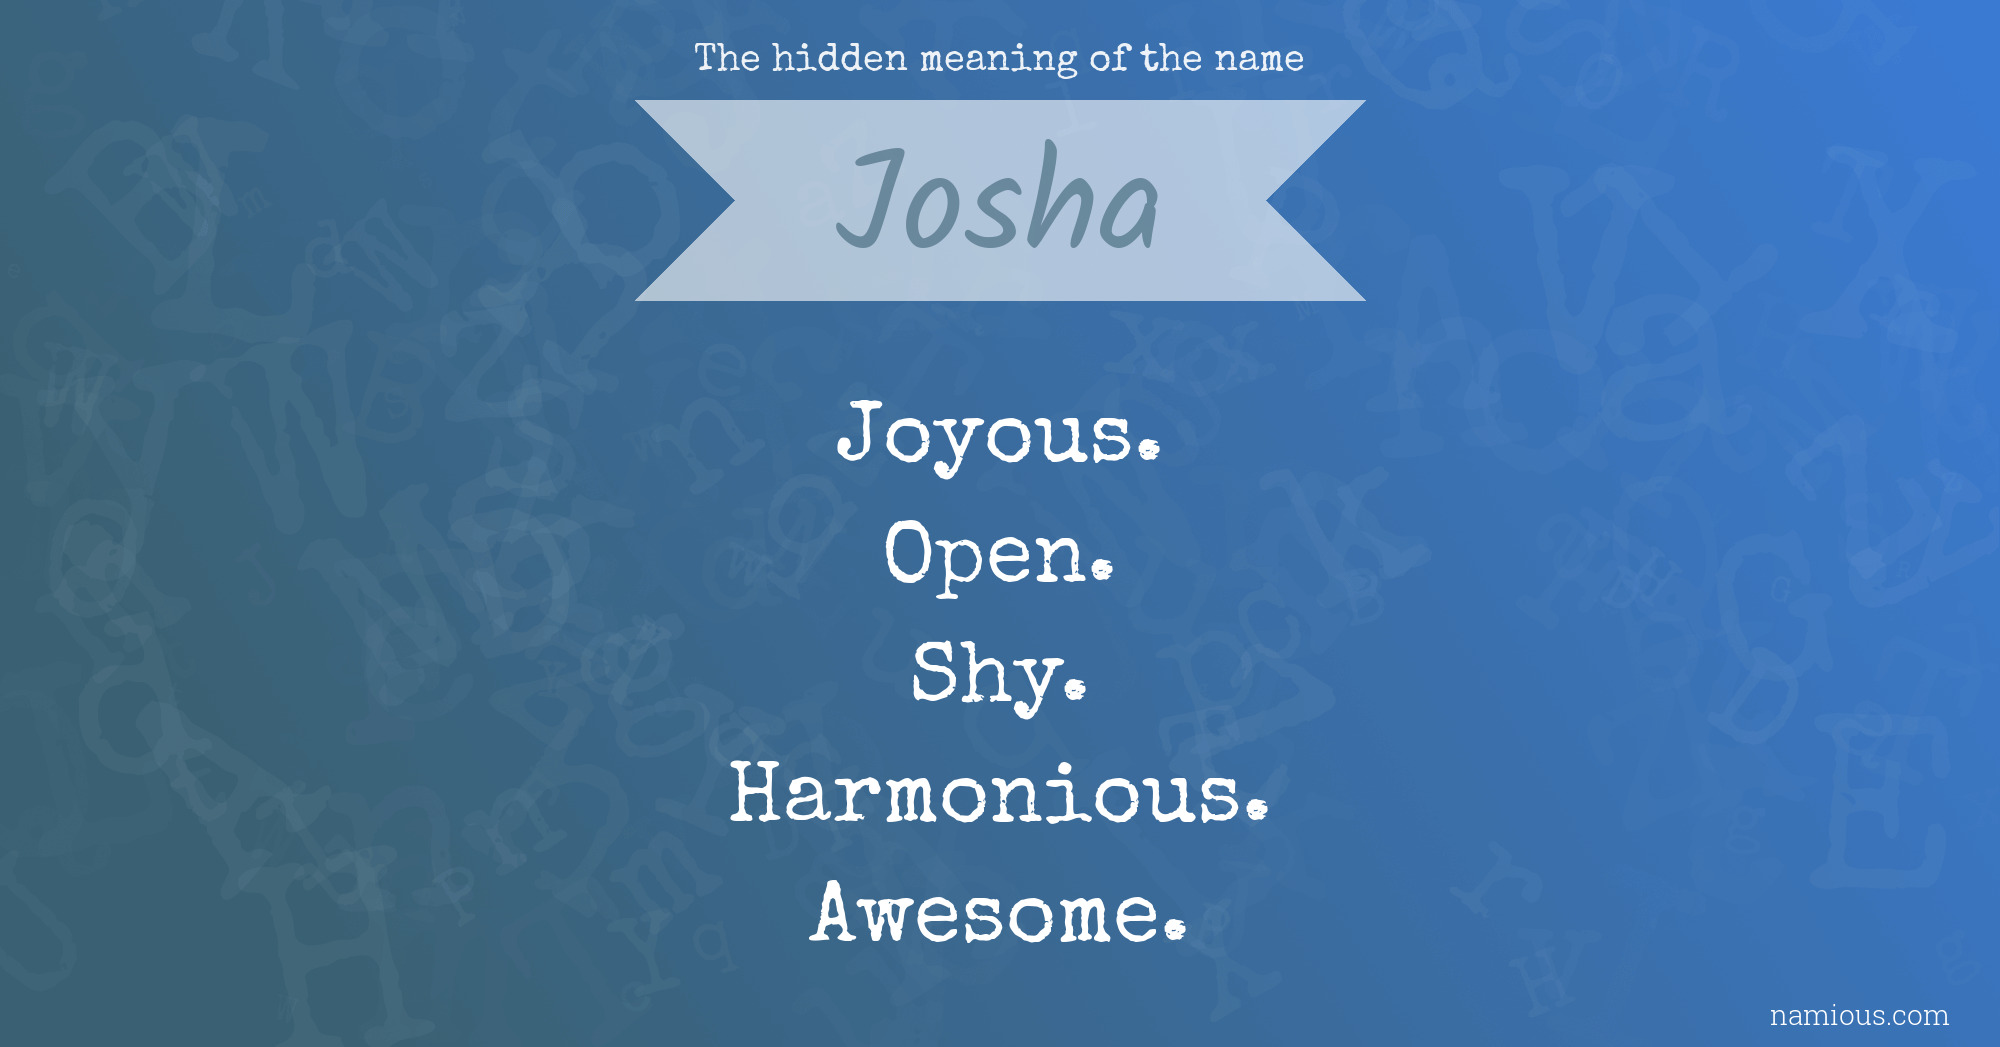 The hidden meaning of the name Josha